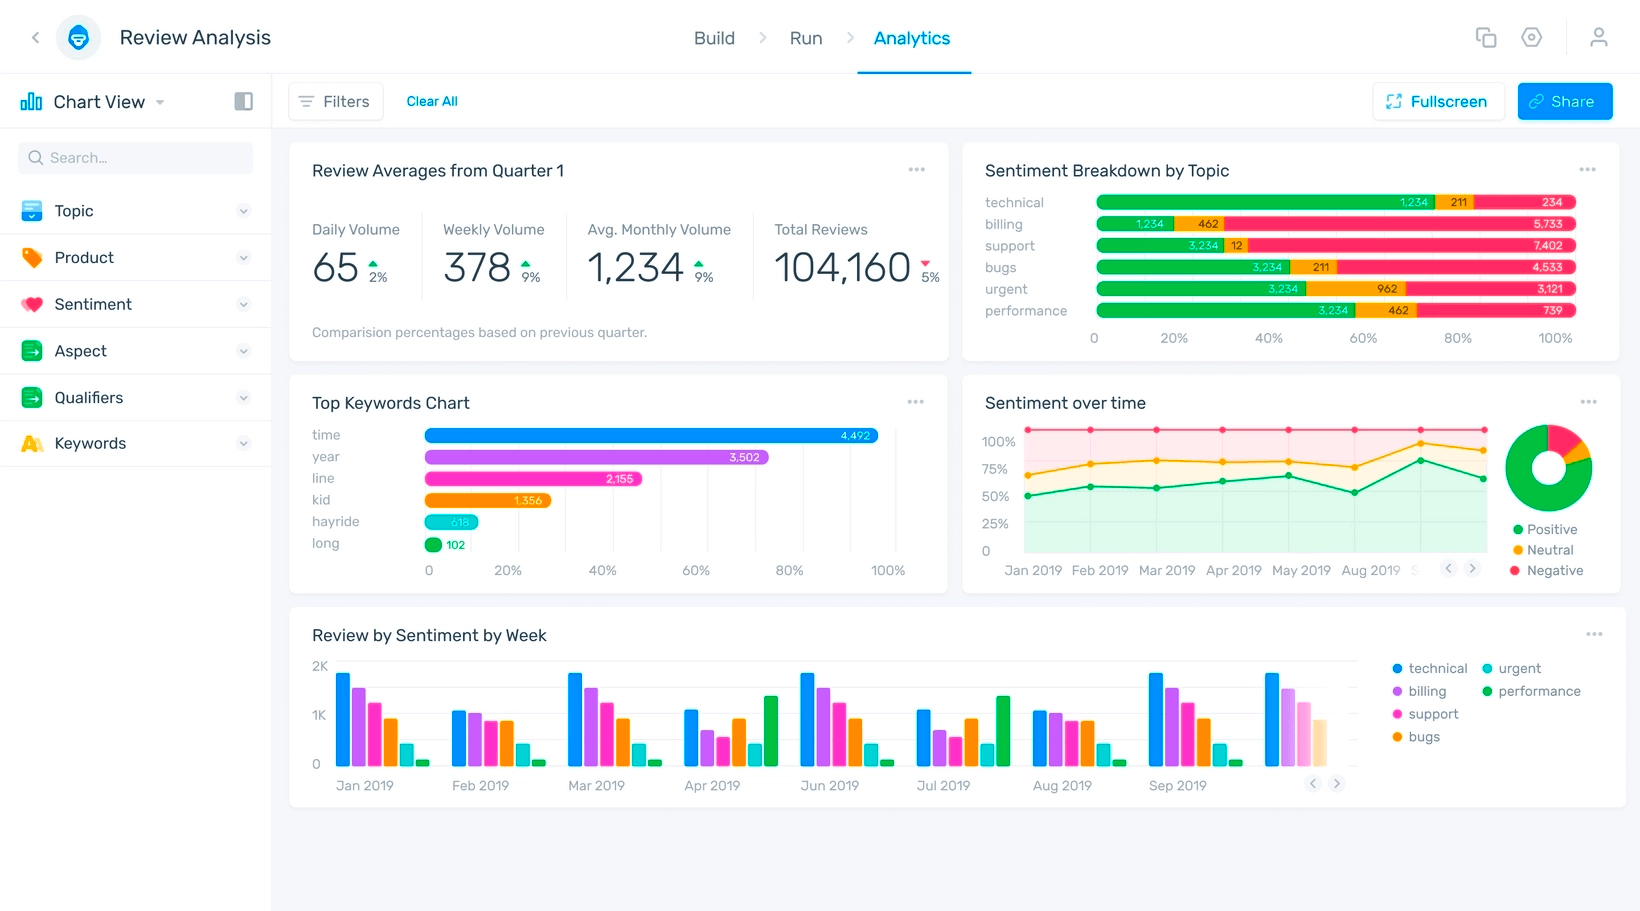 MonkeyLearn Review Analysis Dashboard